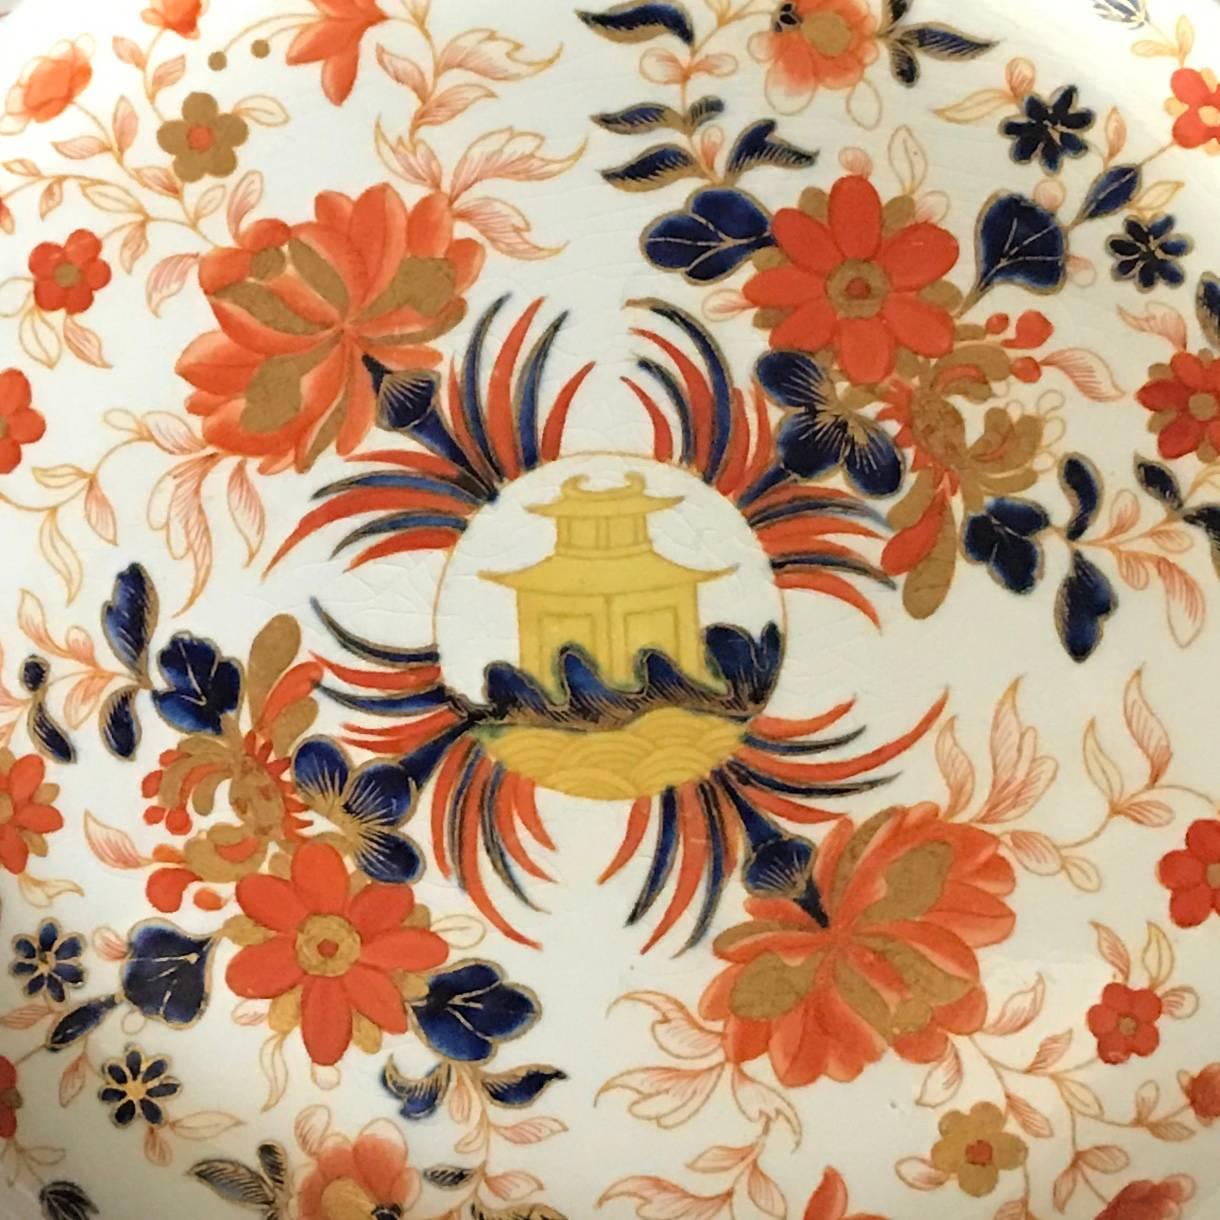 Wedgwood pearlware Imari decorated in gilt, cobalt blue, iron red and peach chinoiserie flowers with a central yellow pagoda medallion, England, mid-19th century.
Dimensions: 9.88